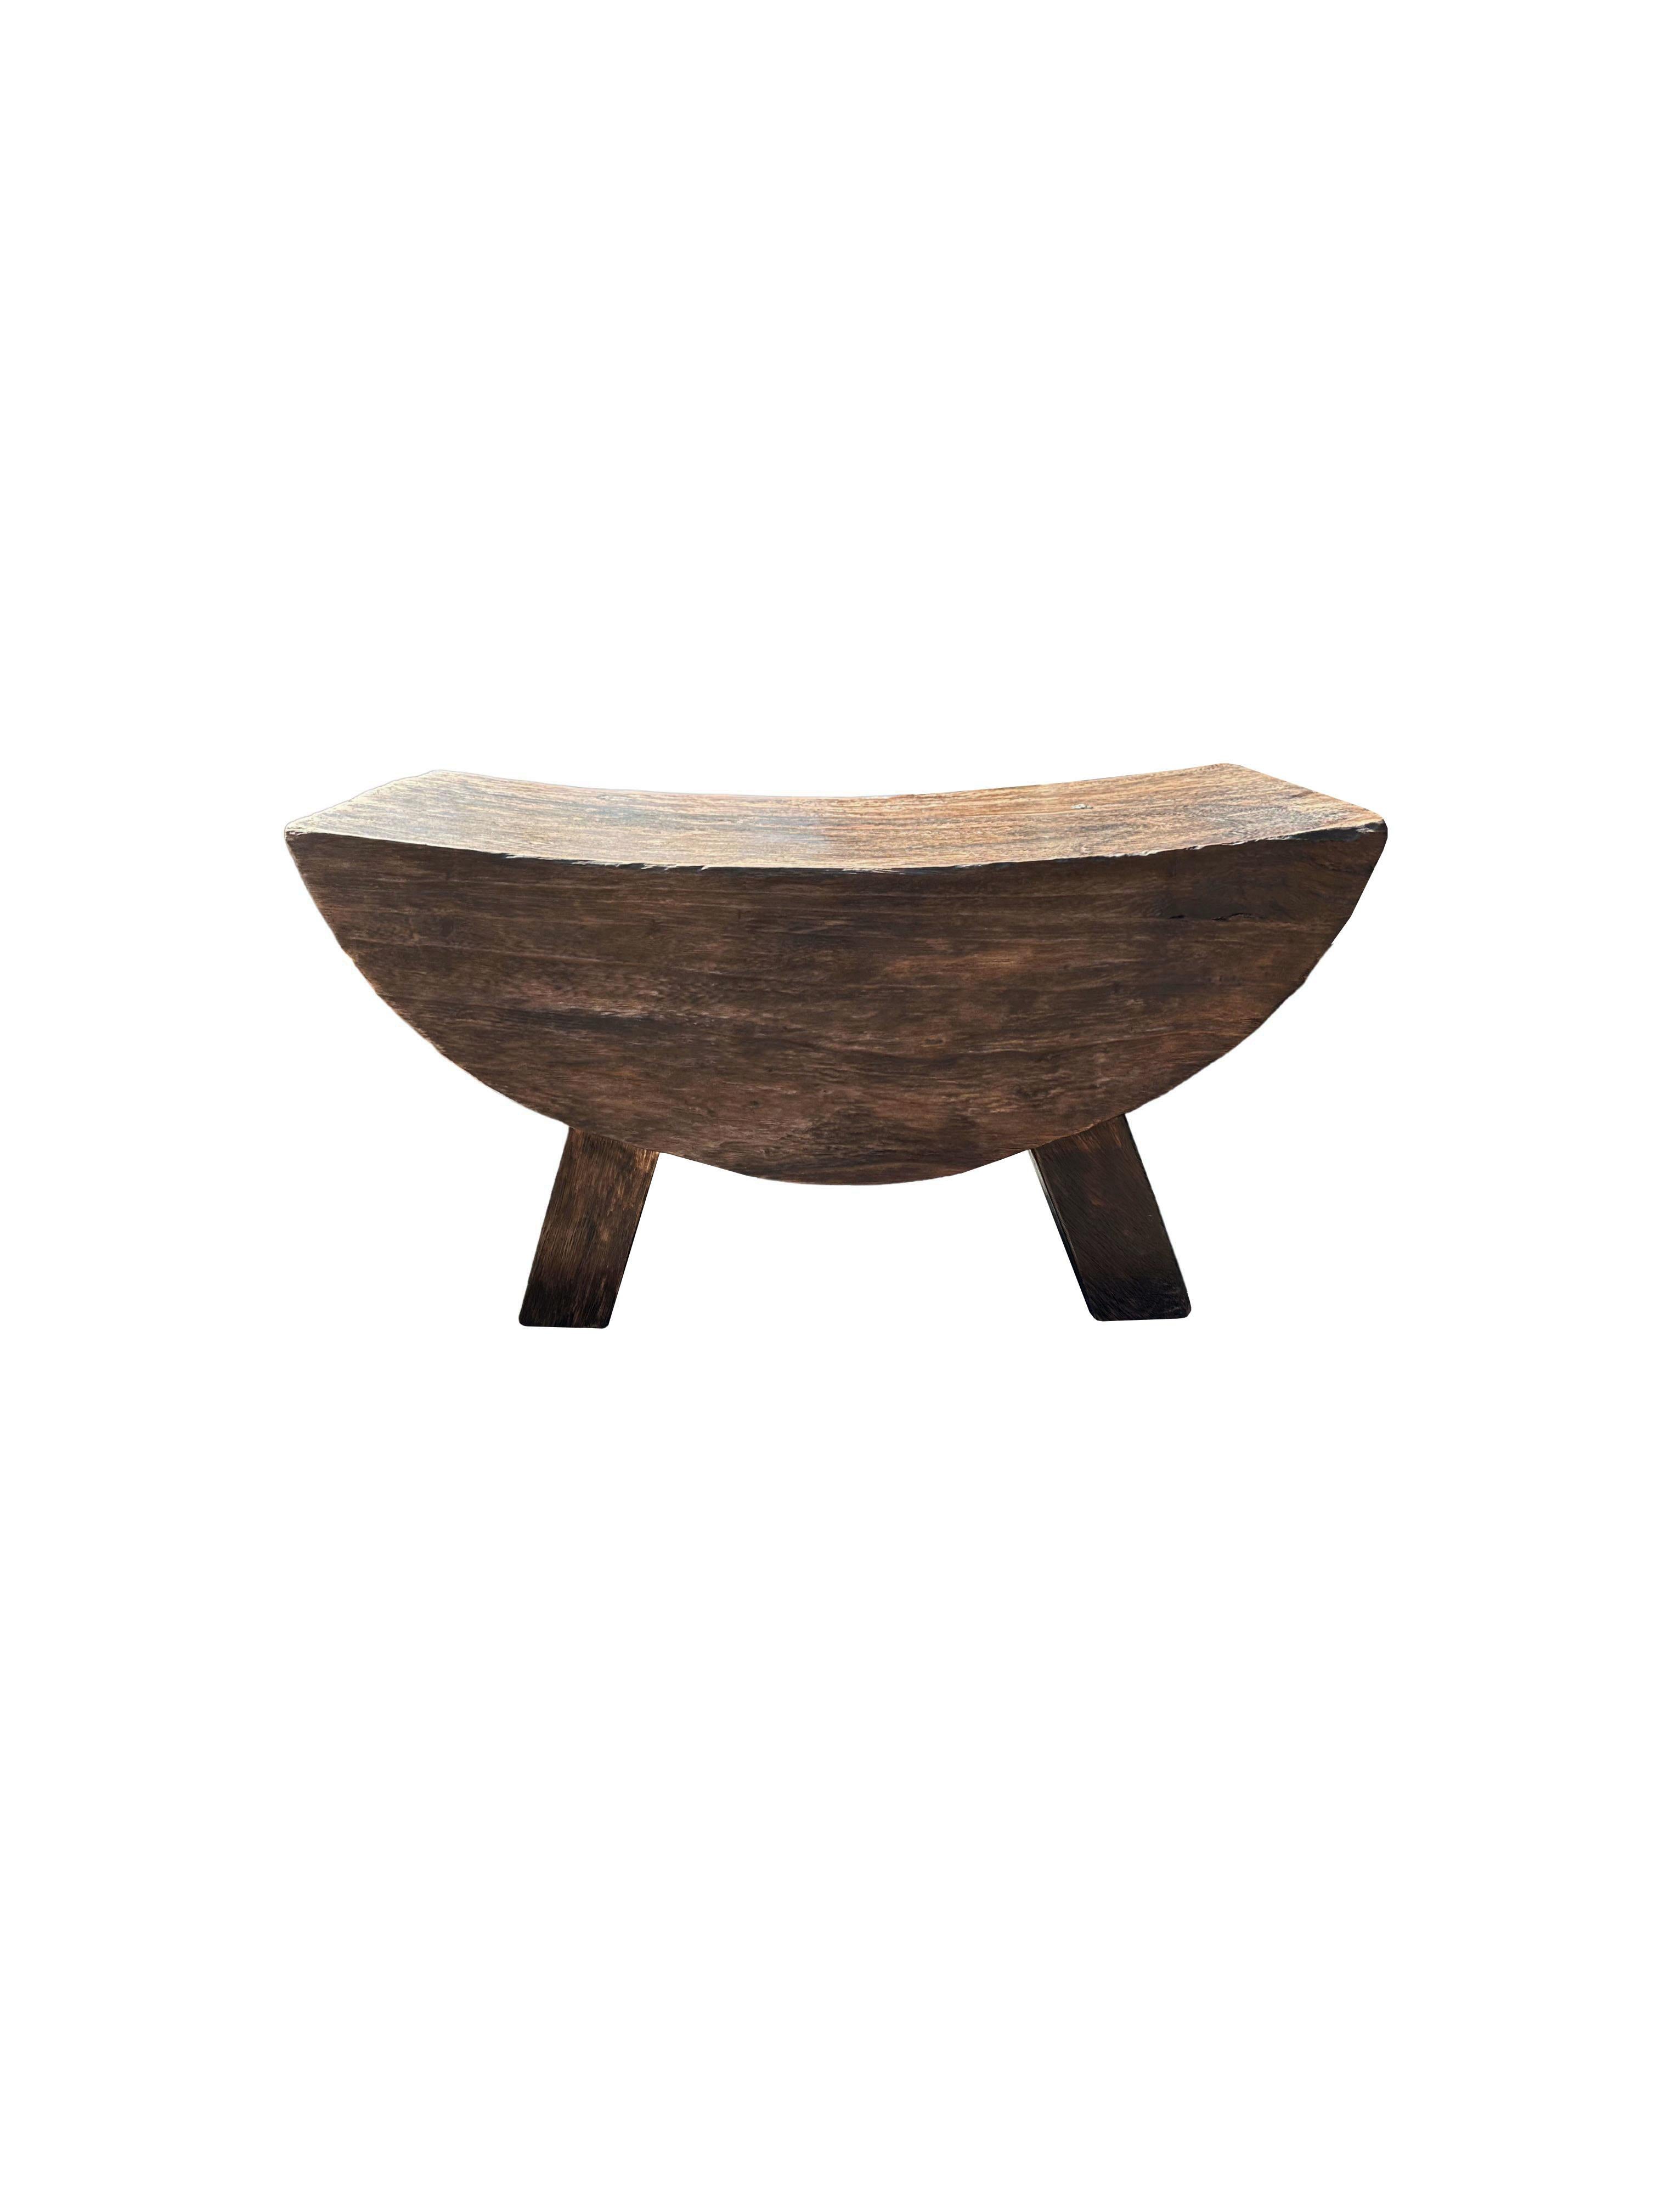 Sculptural Stool with Curved Seat Suar Wood  In Good Condition For Sale In Jimbaran, Bali